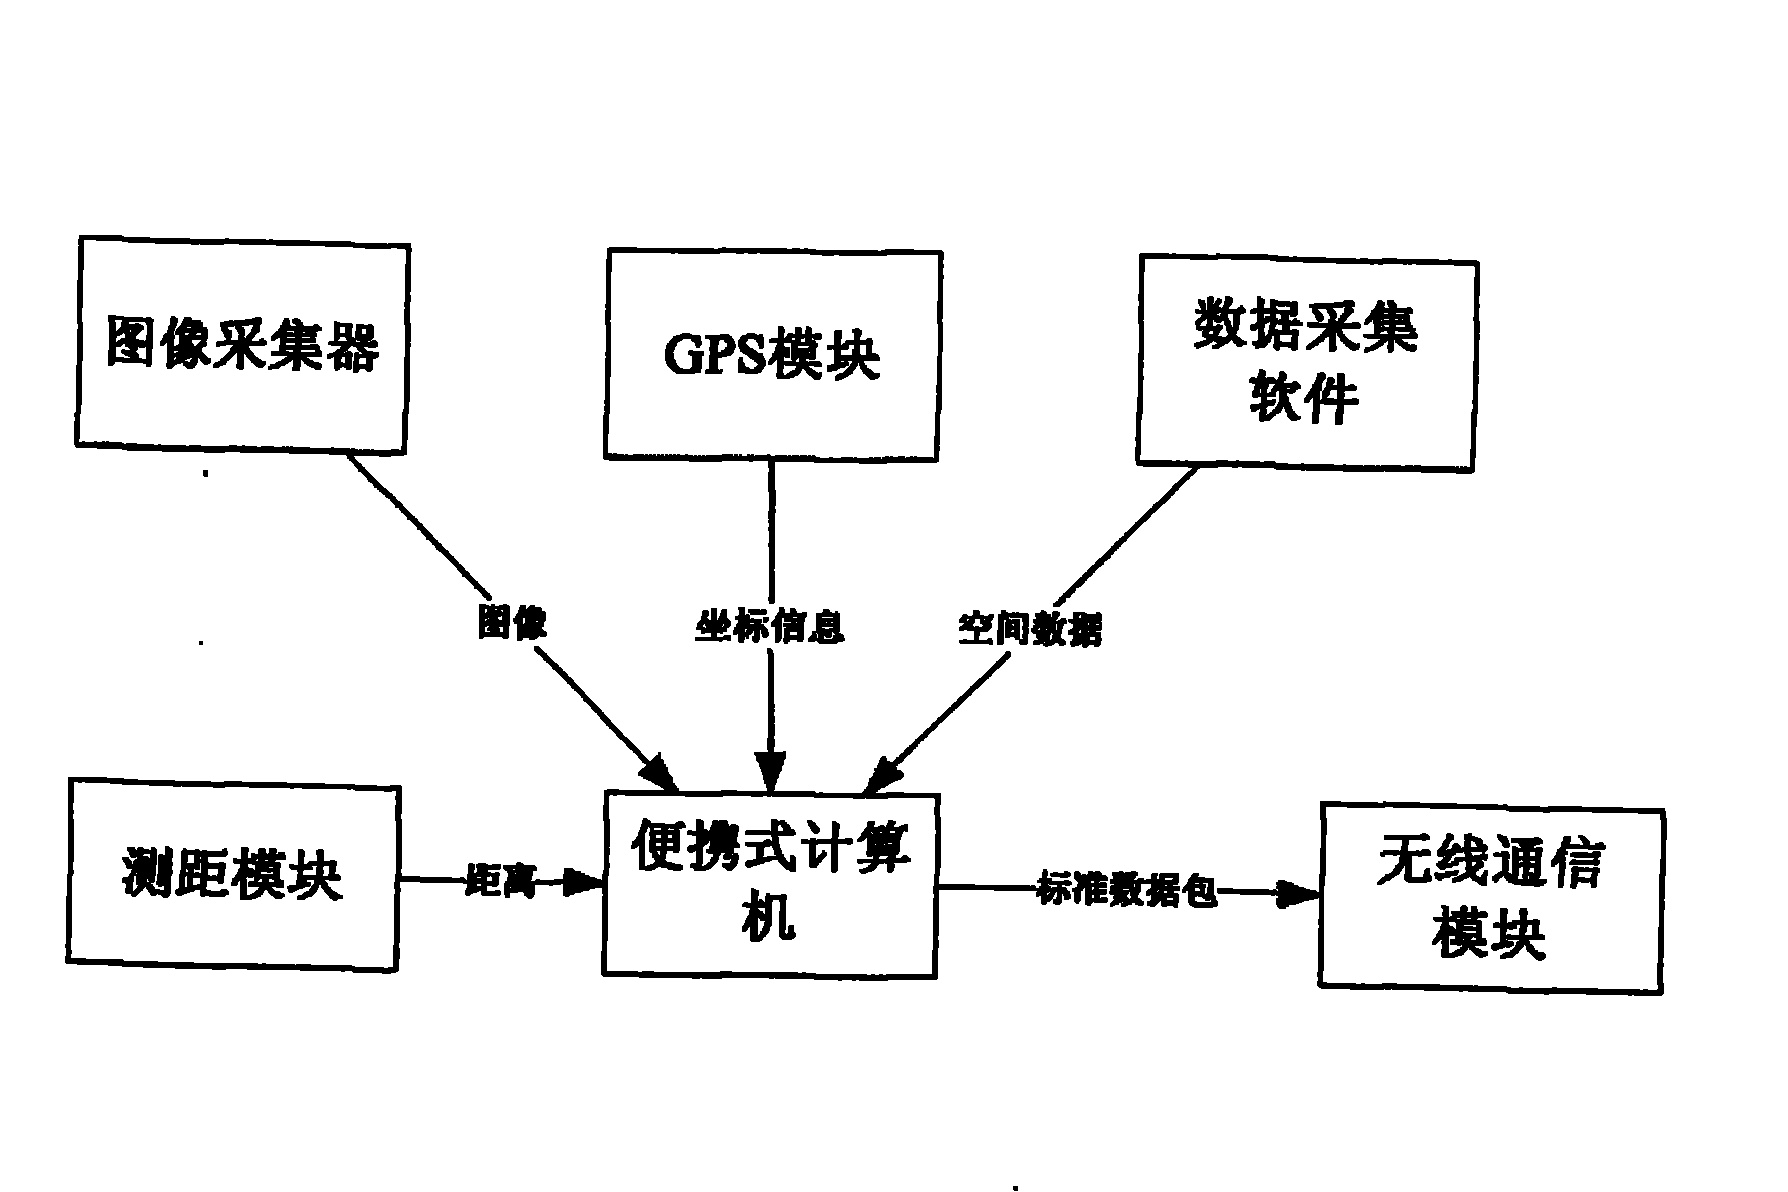 Method and system for monitoring wetland resource and ecological environment